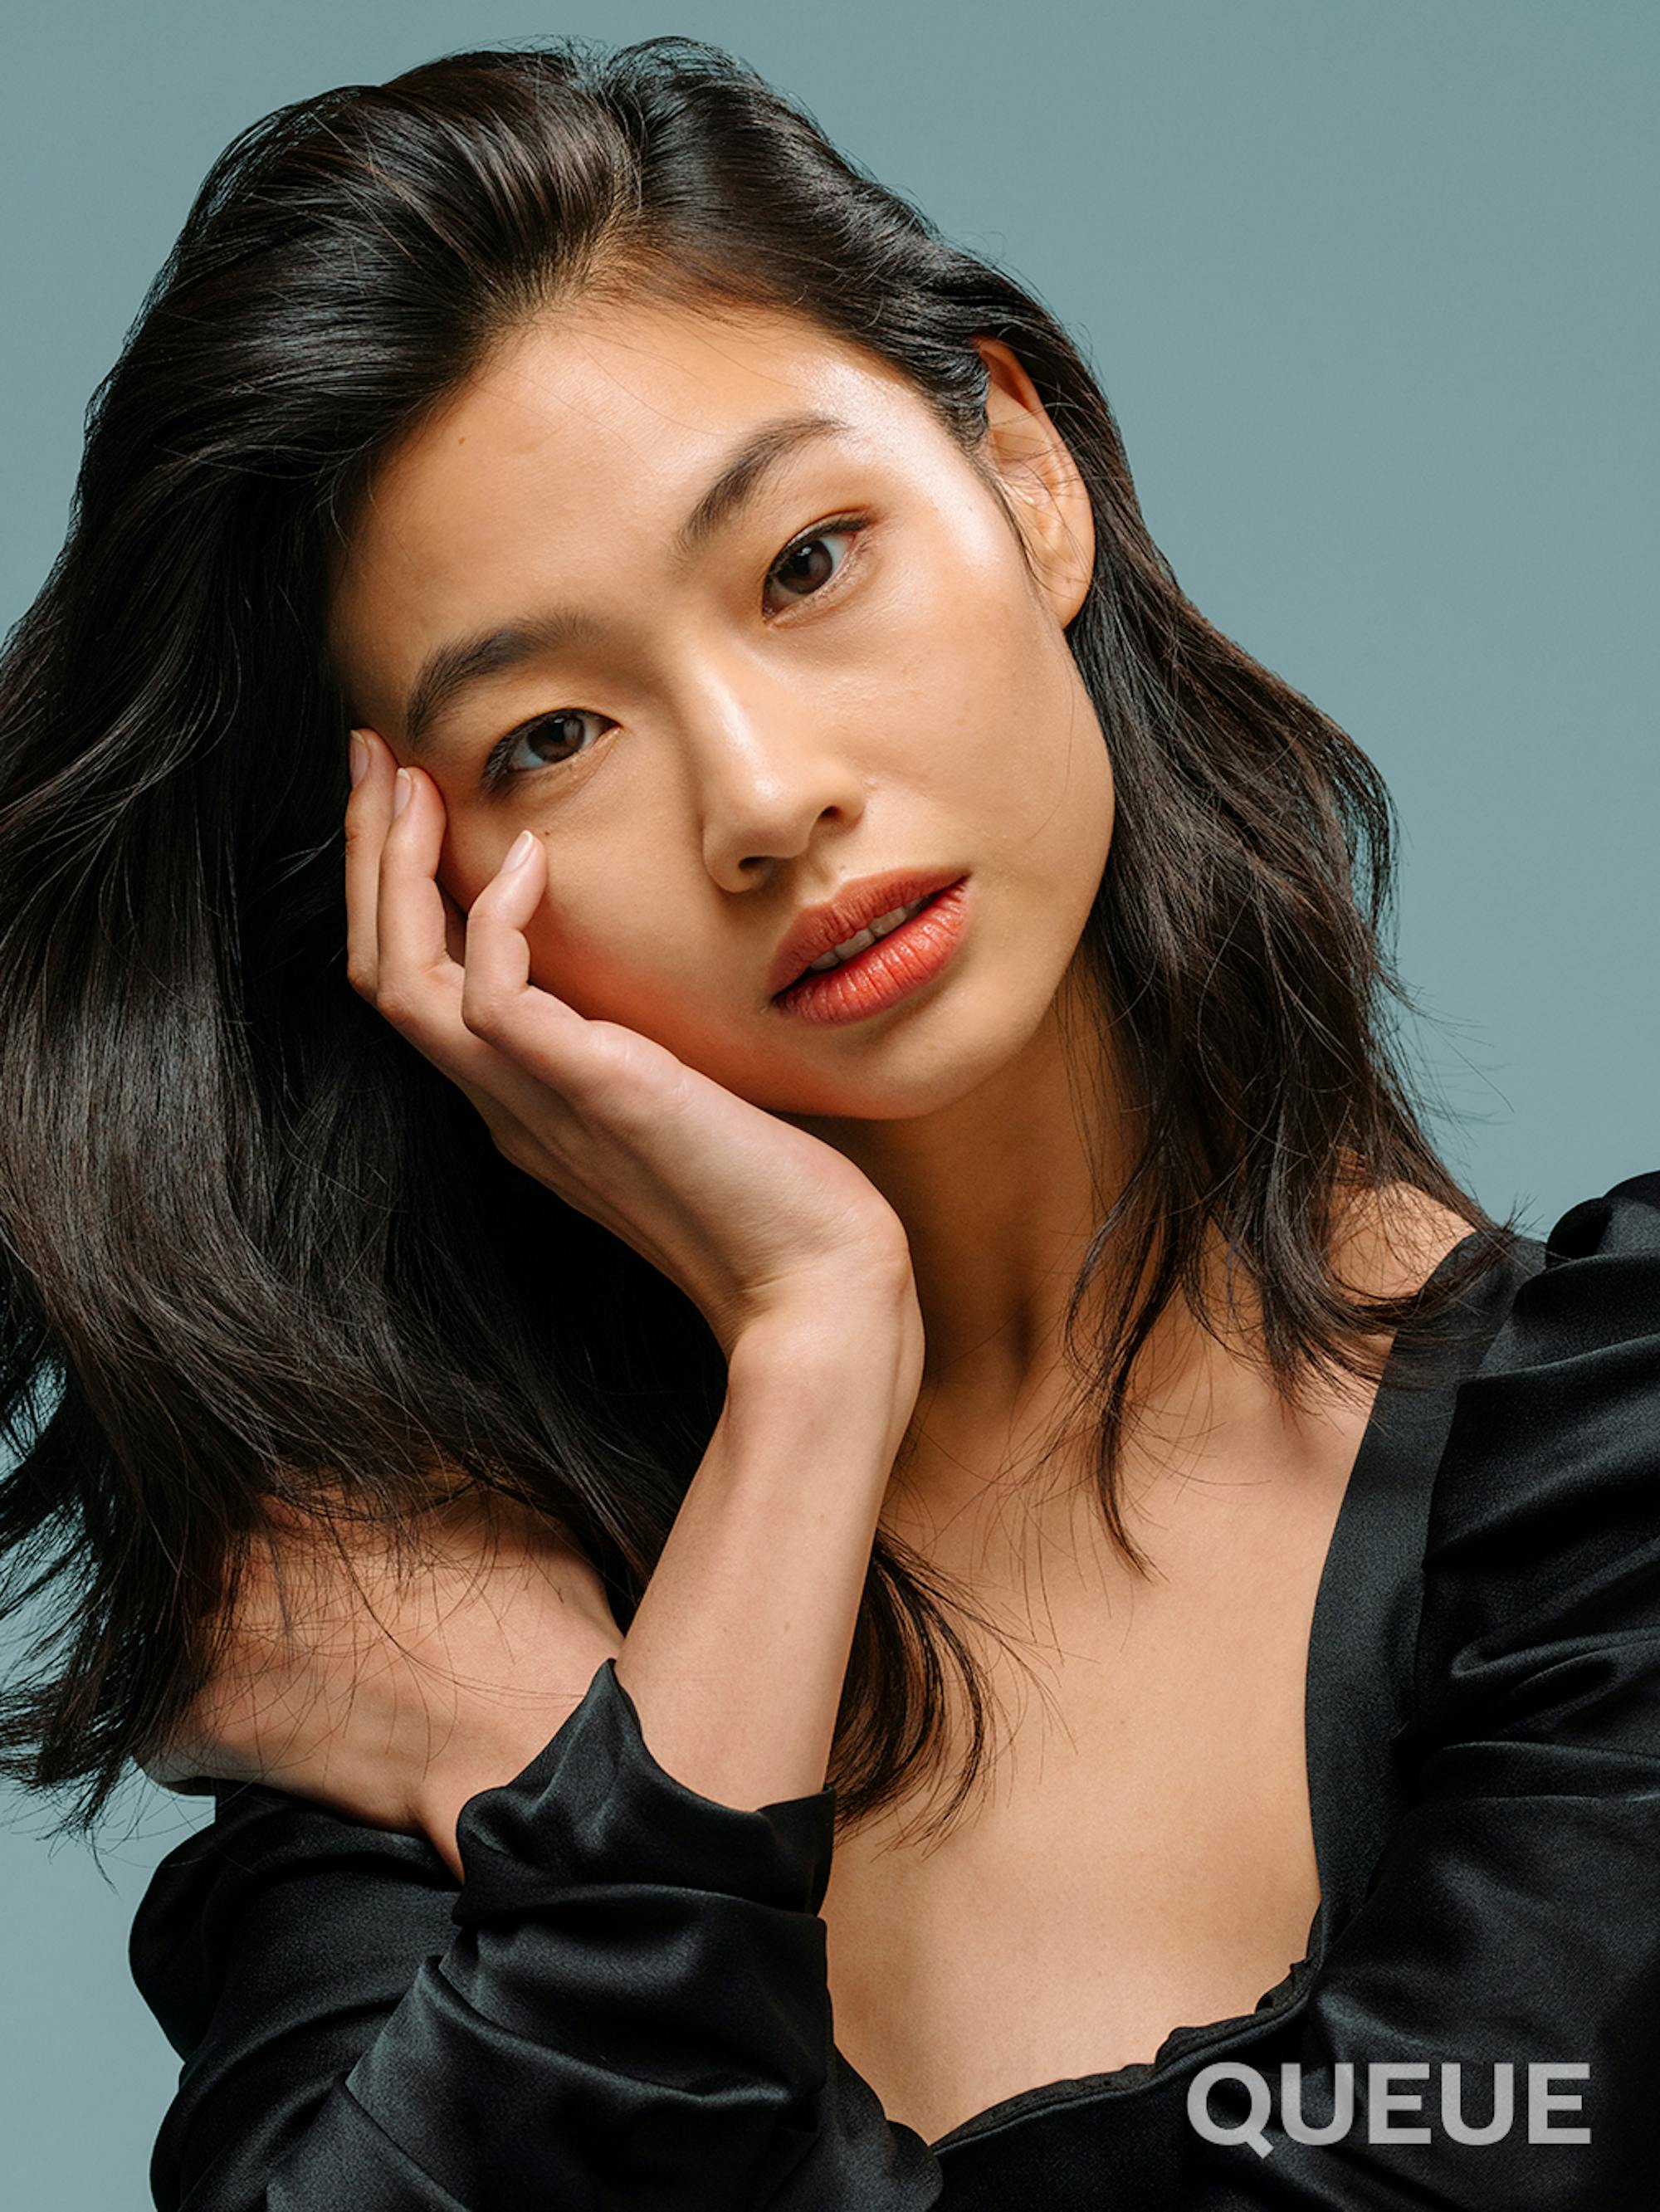 Jung Ho-yeon in a tight crop with her head tilted and one hand resting on her face, the other behind it placed on her shoulder and her hair flows to the left. She is wearing a satin black dress.